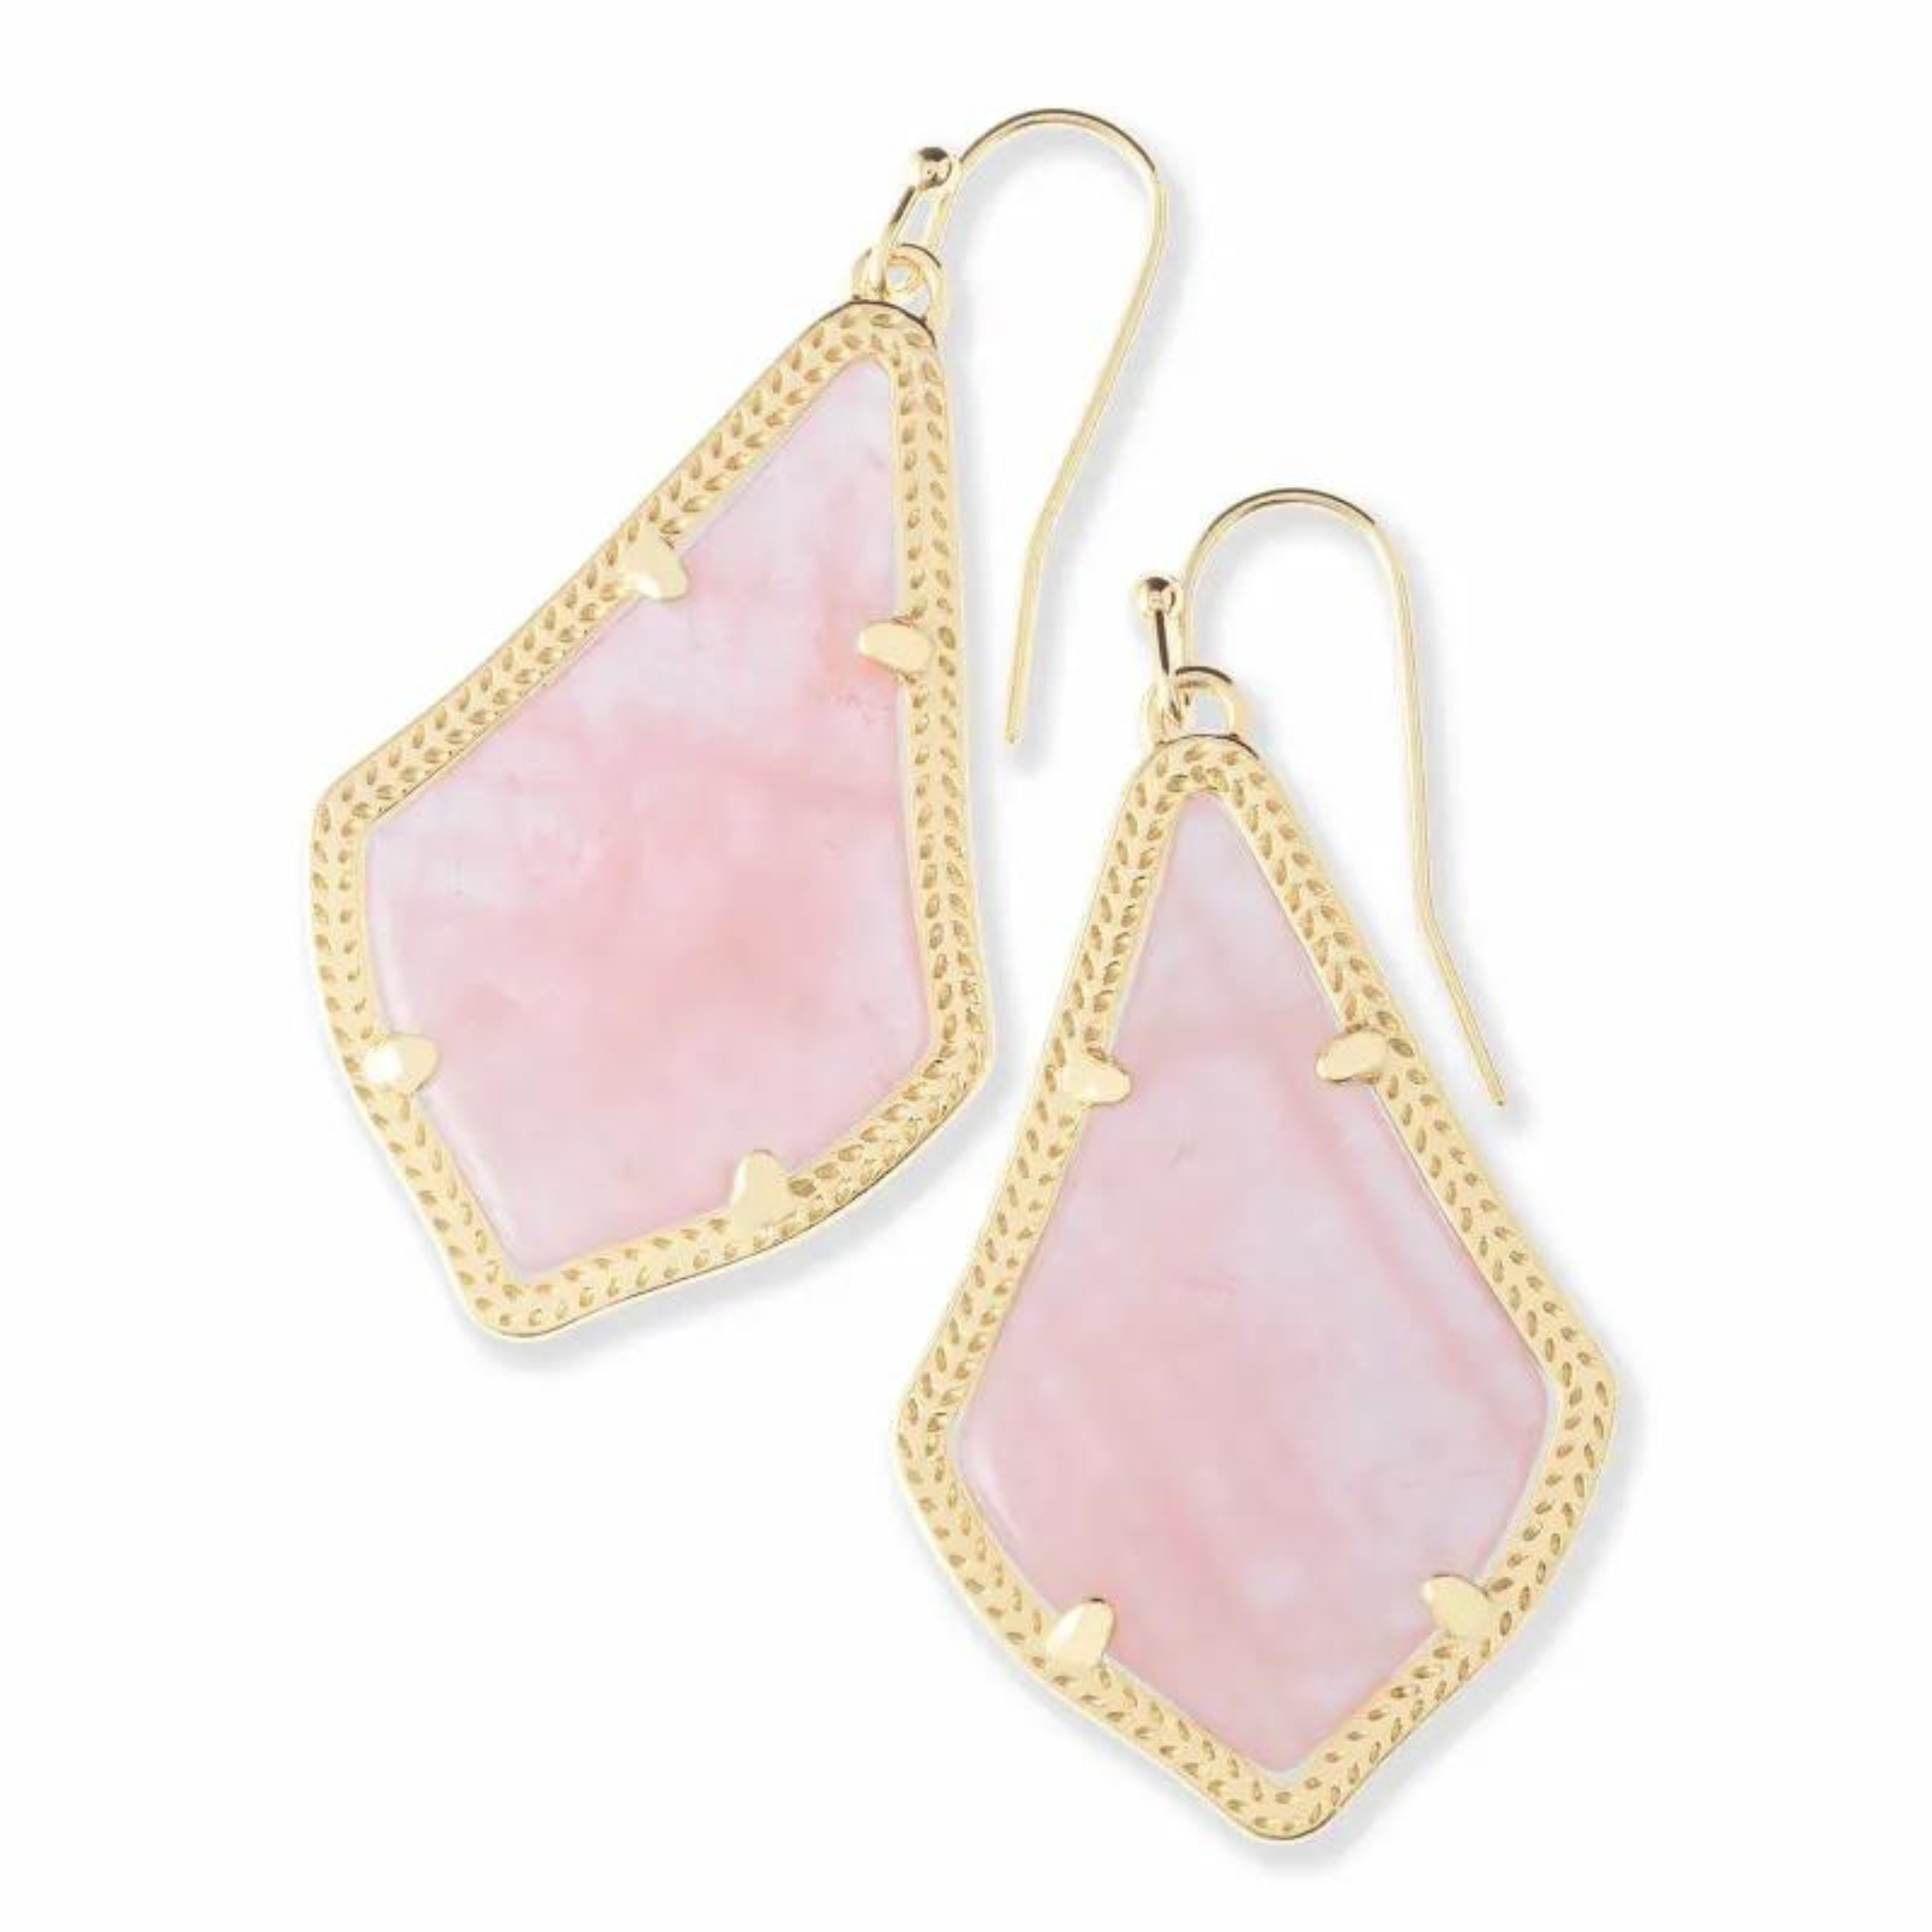 Gold rose quartz dangle earrings, pictured on a white background.